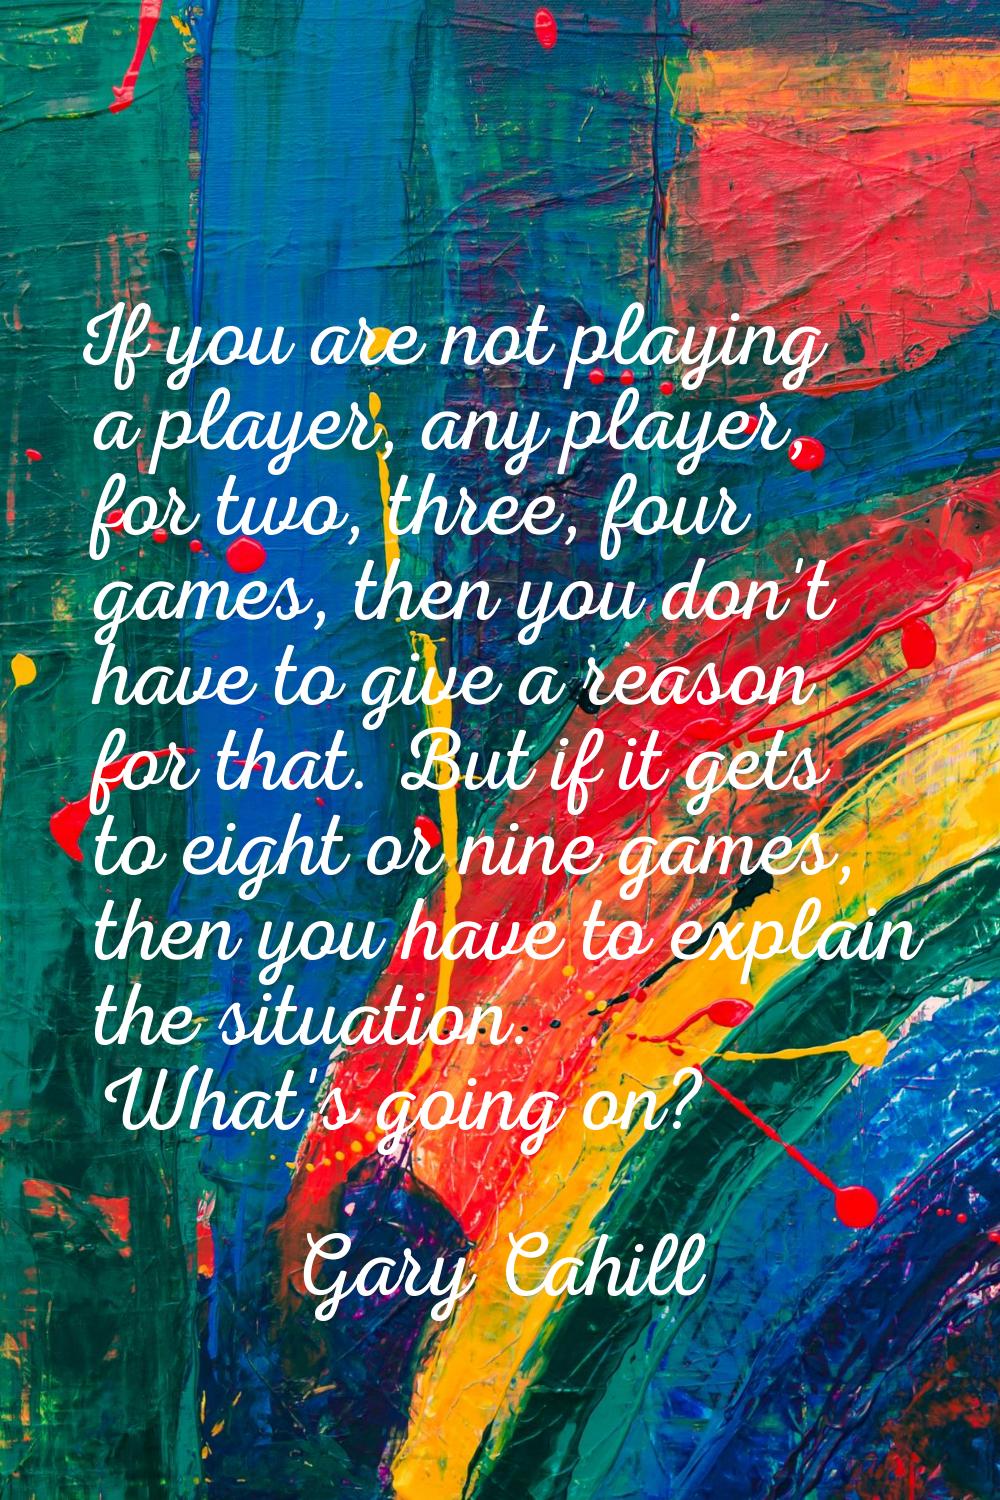 If you are not playing a player, any player, for two, three, four games, then you don't have to giv